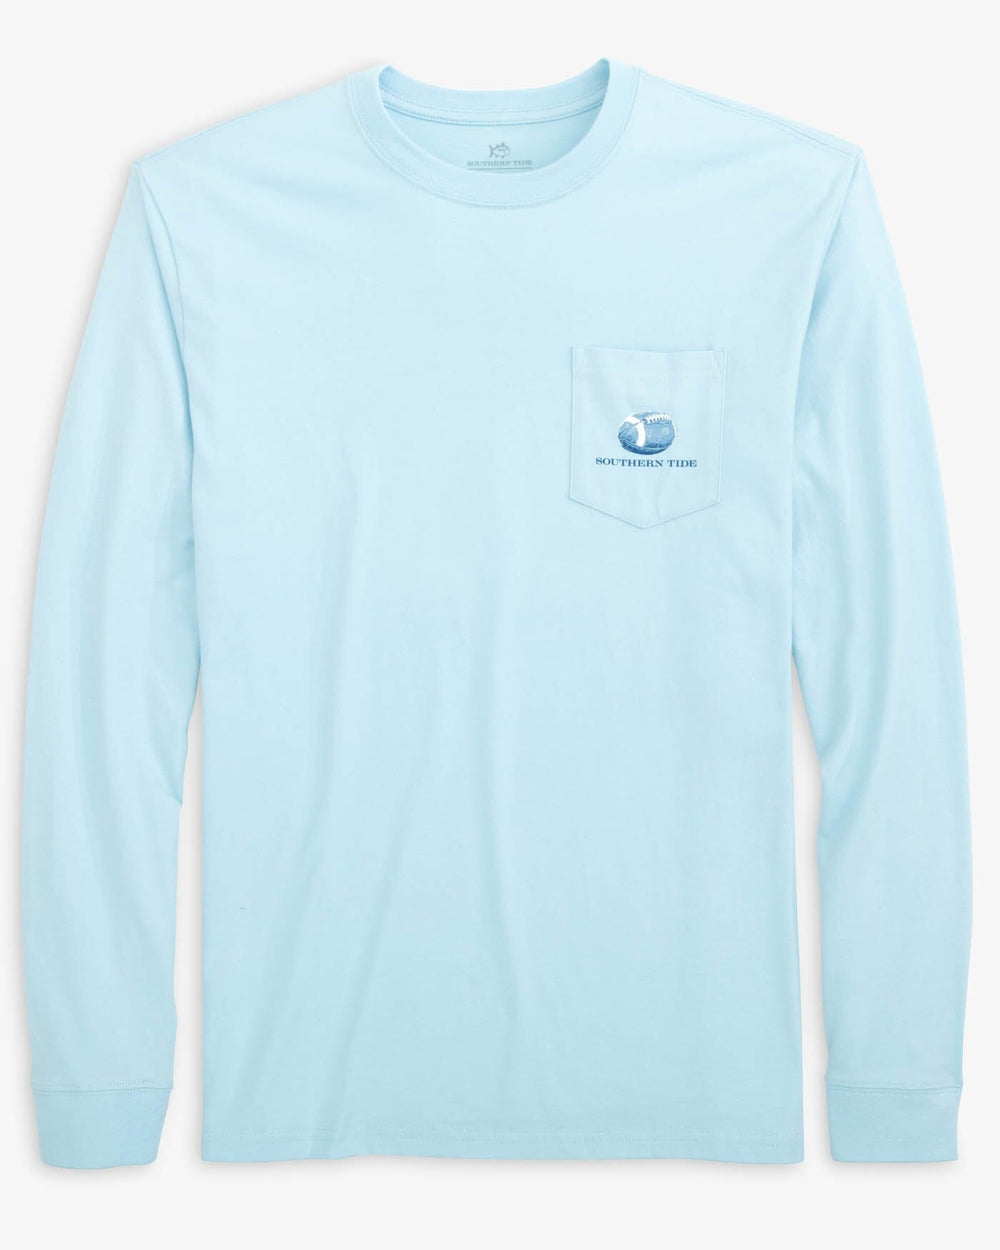 The front view of the Southern Tide brrr-eeze Heather Performance Polo Shirt by Southern Tide - Dream Blue